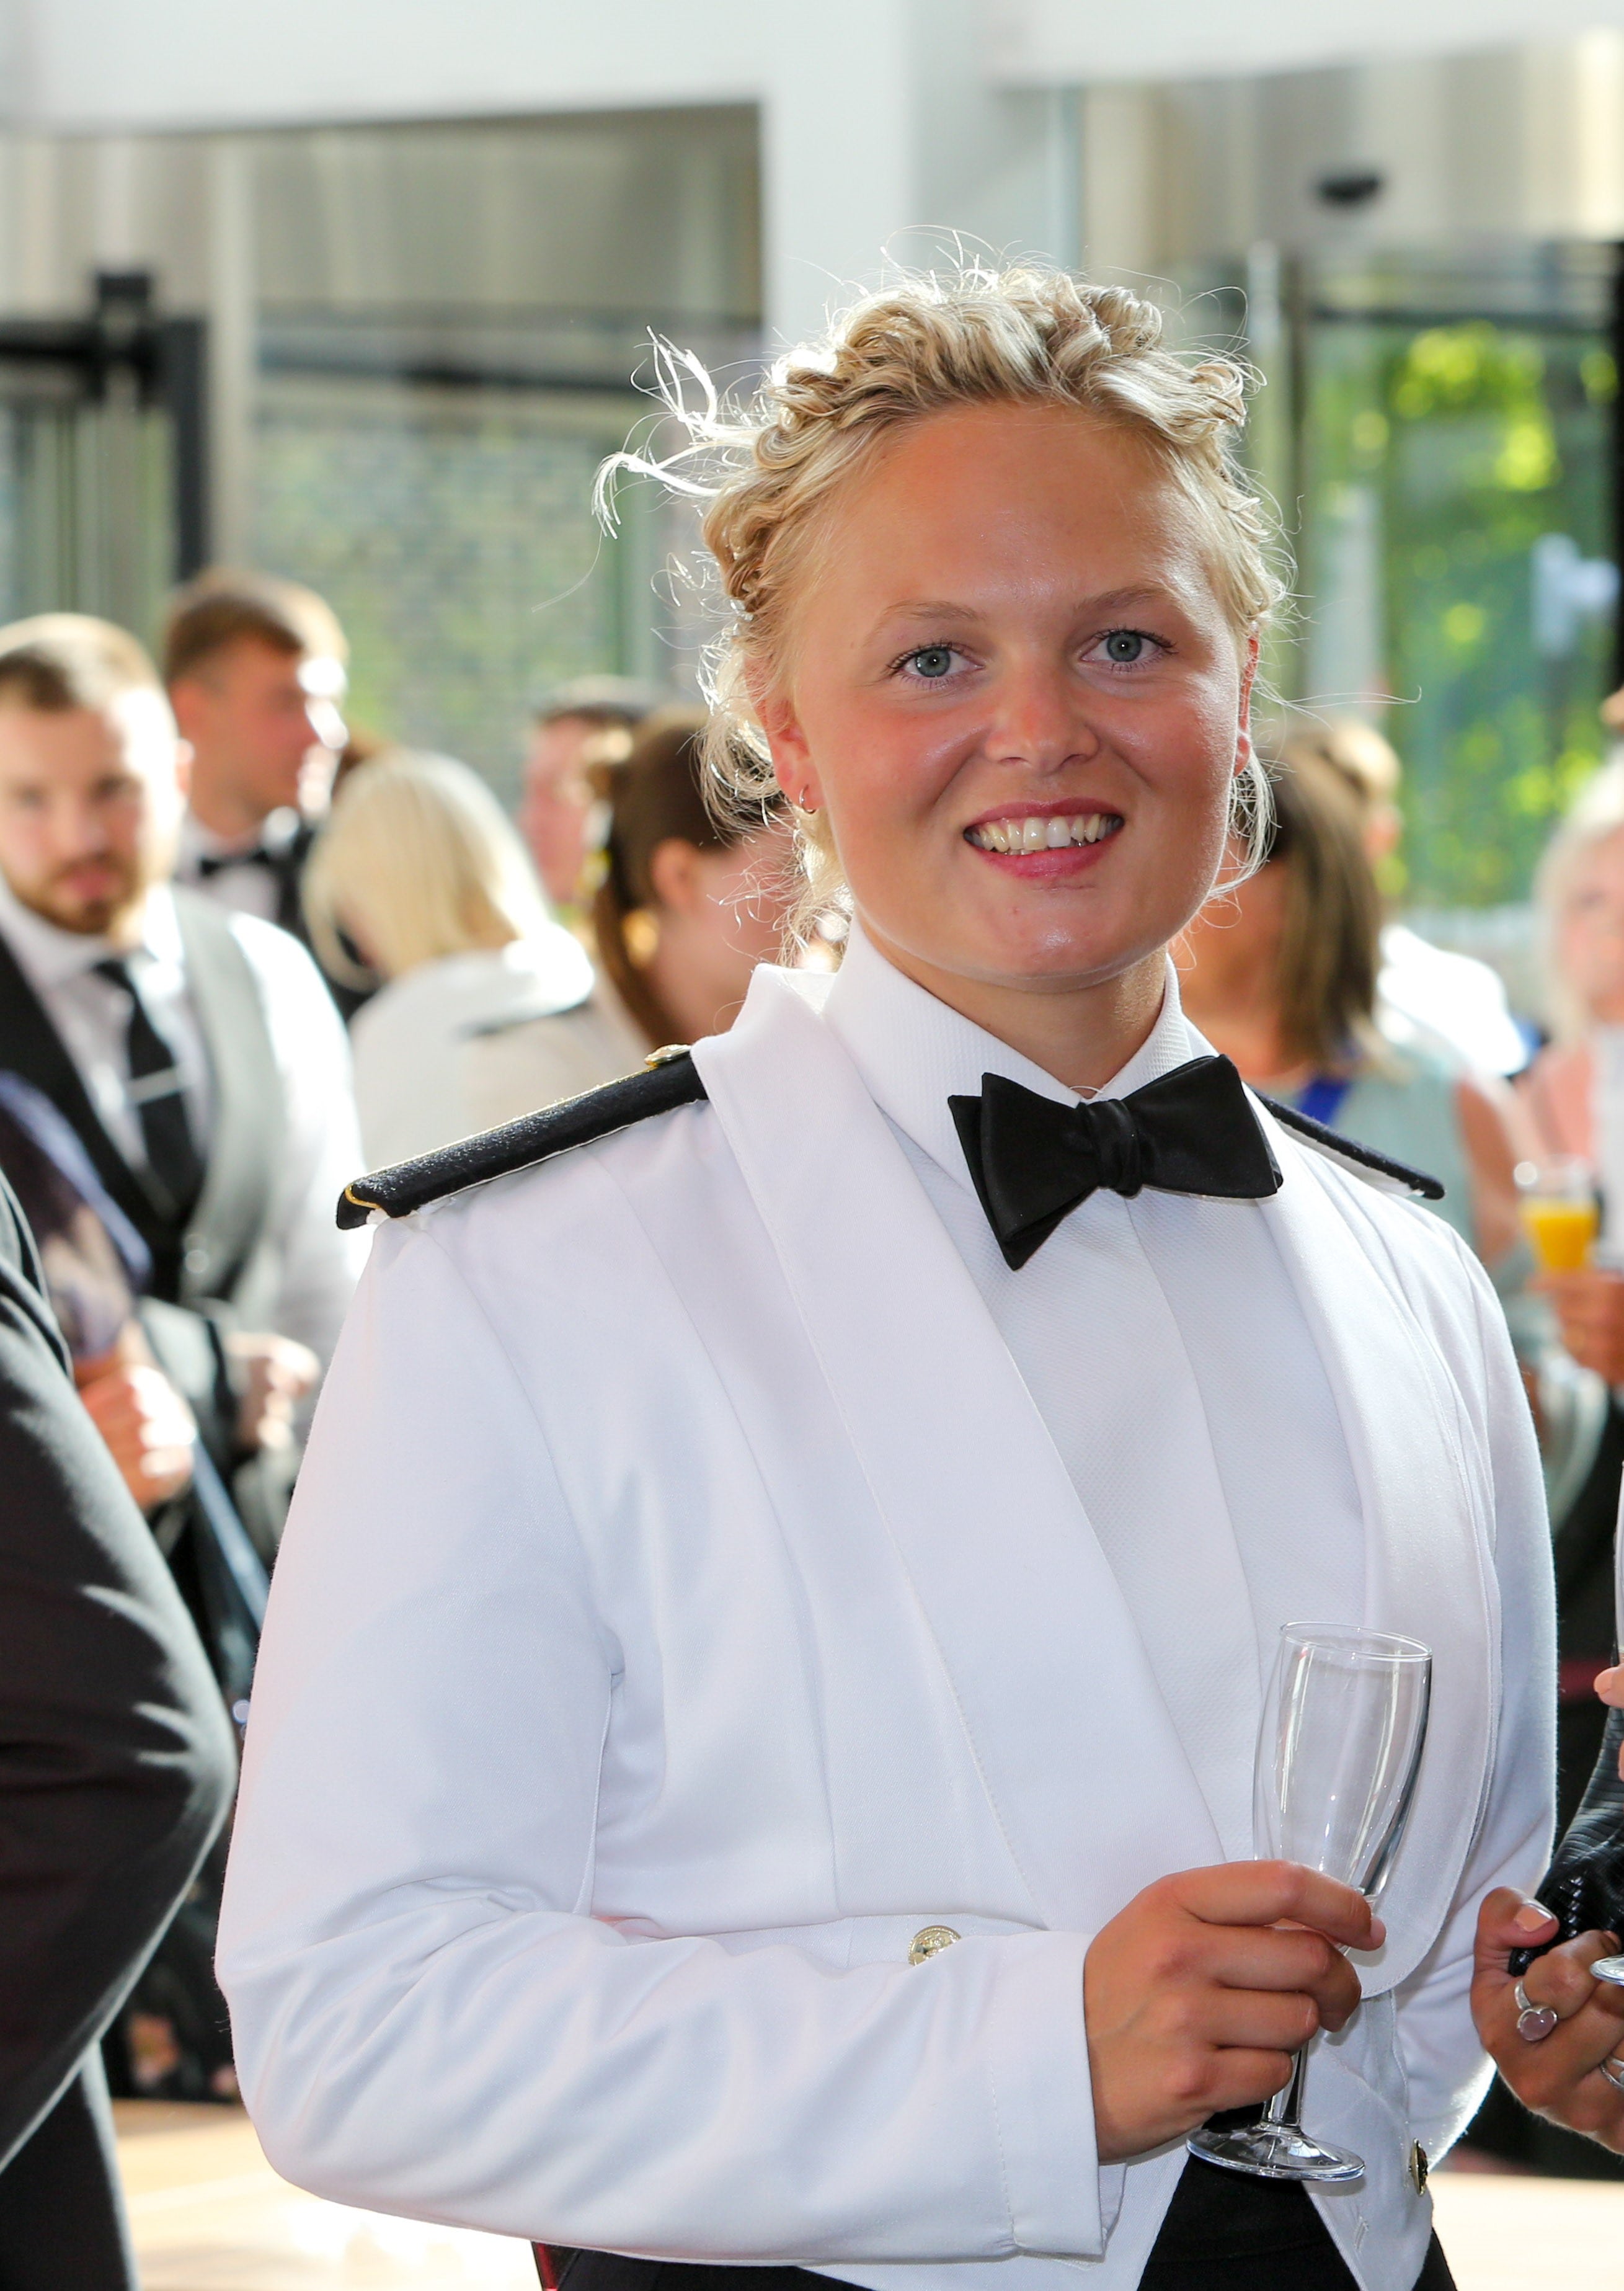 Daisy Jarvis at the Warsash Maritime School Passing Out ceremony last summer